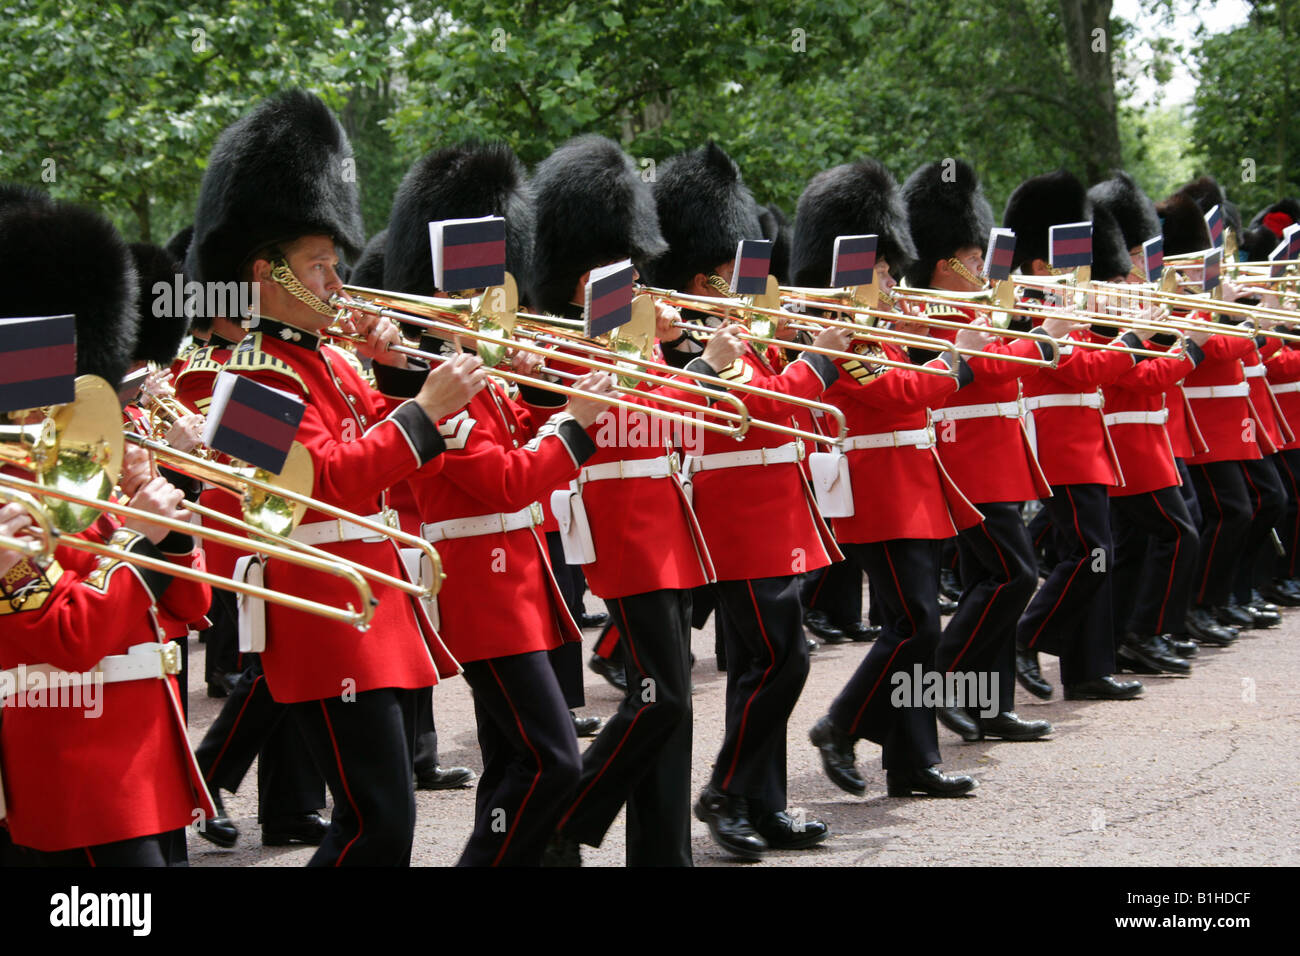 Grenadier Guards, Buckingham Palace, London, Trooping the Colour Ceremony, June 14th 2008 Stock Photo